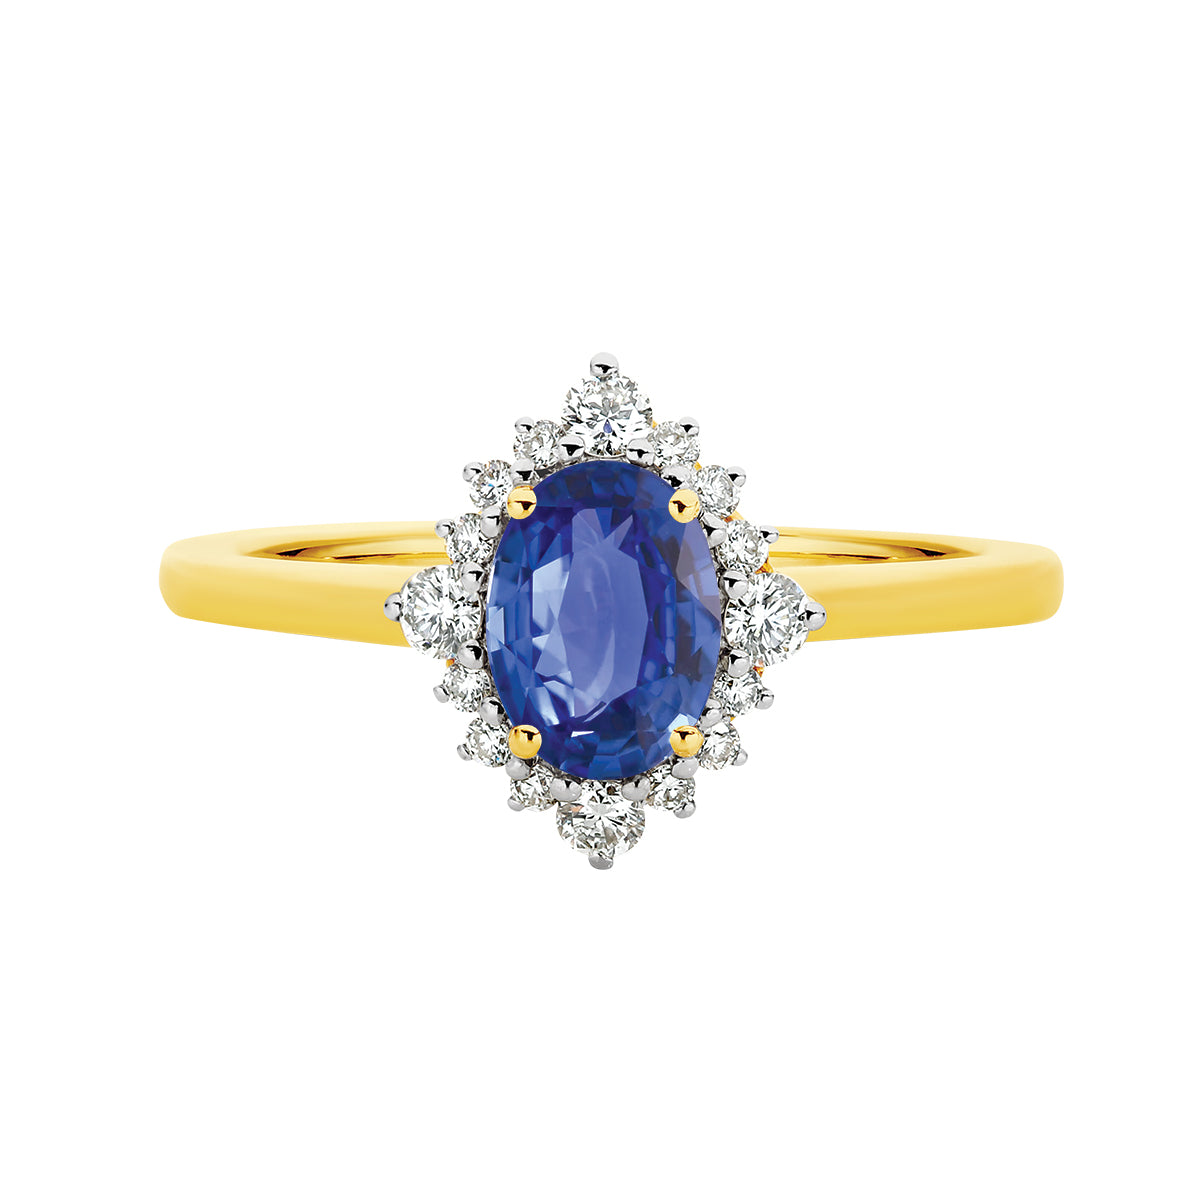 Natural 0.90ct oval Ceylon Sapphire & 0.28ct diamond Sunrise ring in 9ct yellow and white gold.